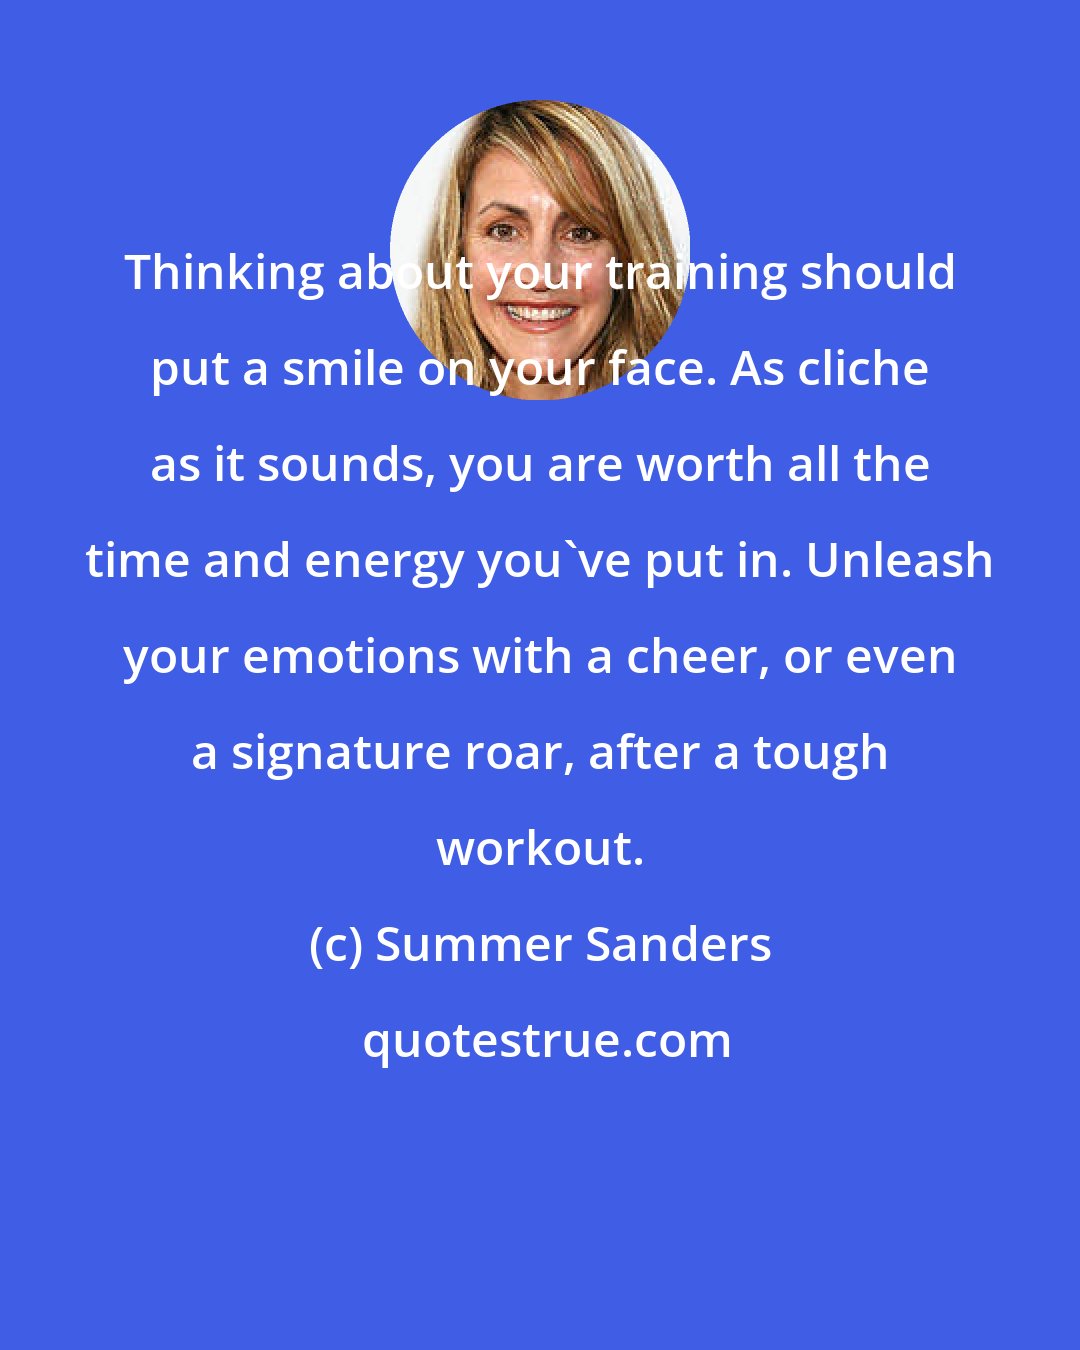 Summer Sanders: Thinking about your training should put a smile on your face. As cliche as it sounds, you are worth all the time and energy you've put in. Unleash your emotions with a cheer, or even a signature roar, after a tough workout.